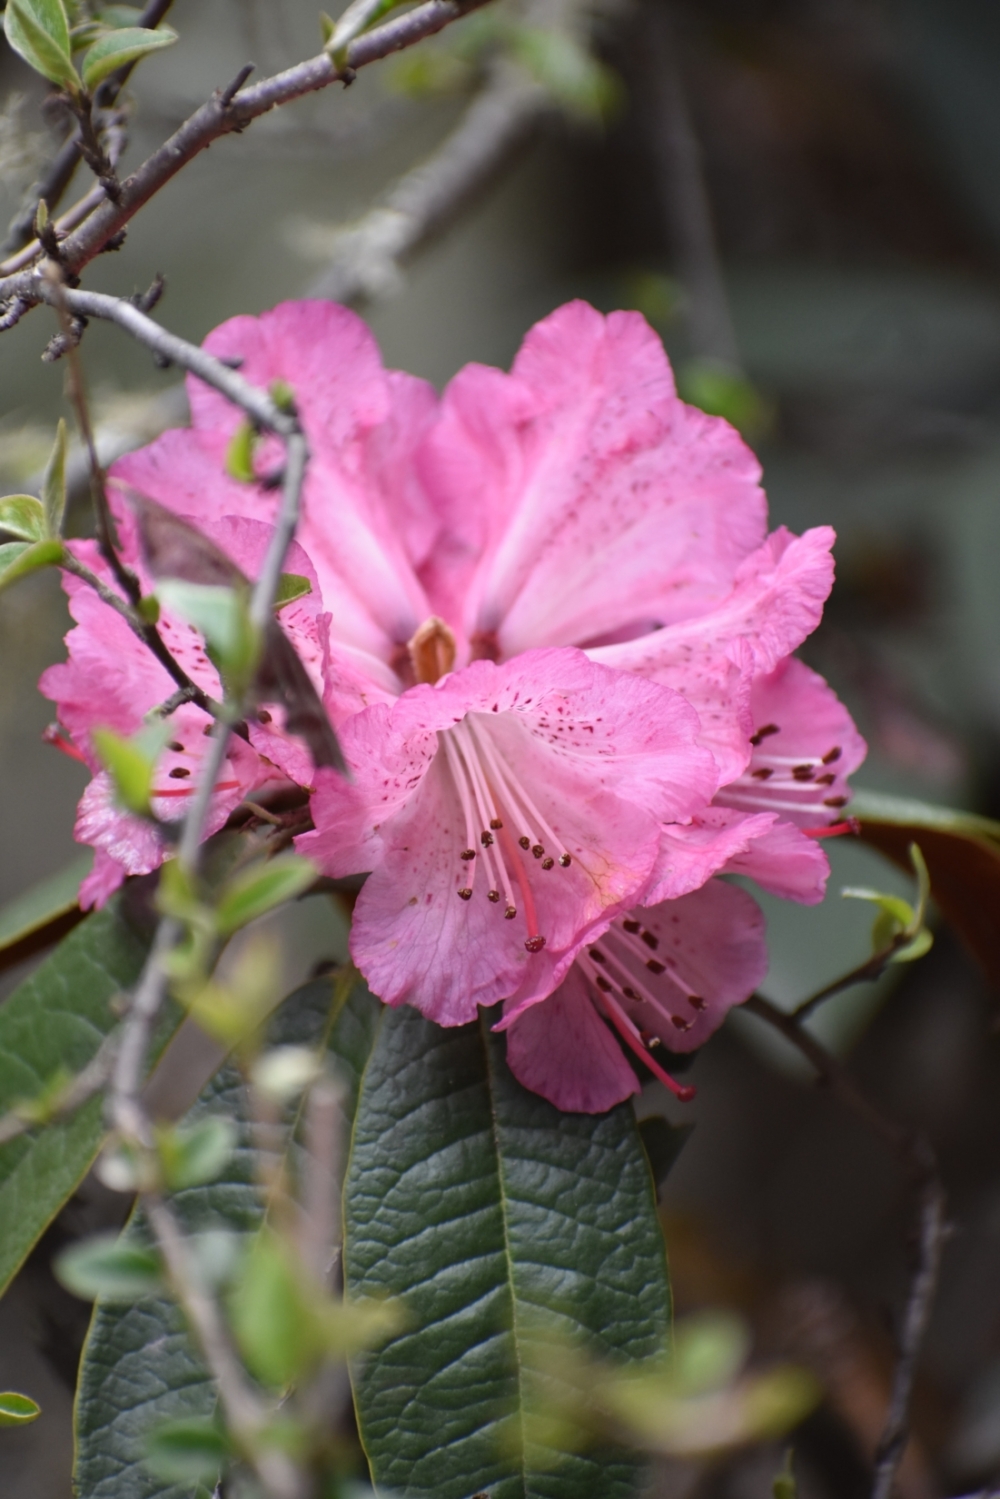 A close-up photograph of pink rhododendron flowers near Debouche and Tengboche in Nepal